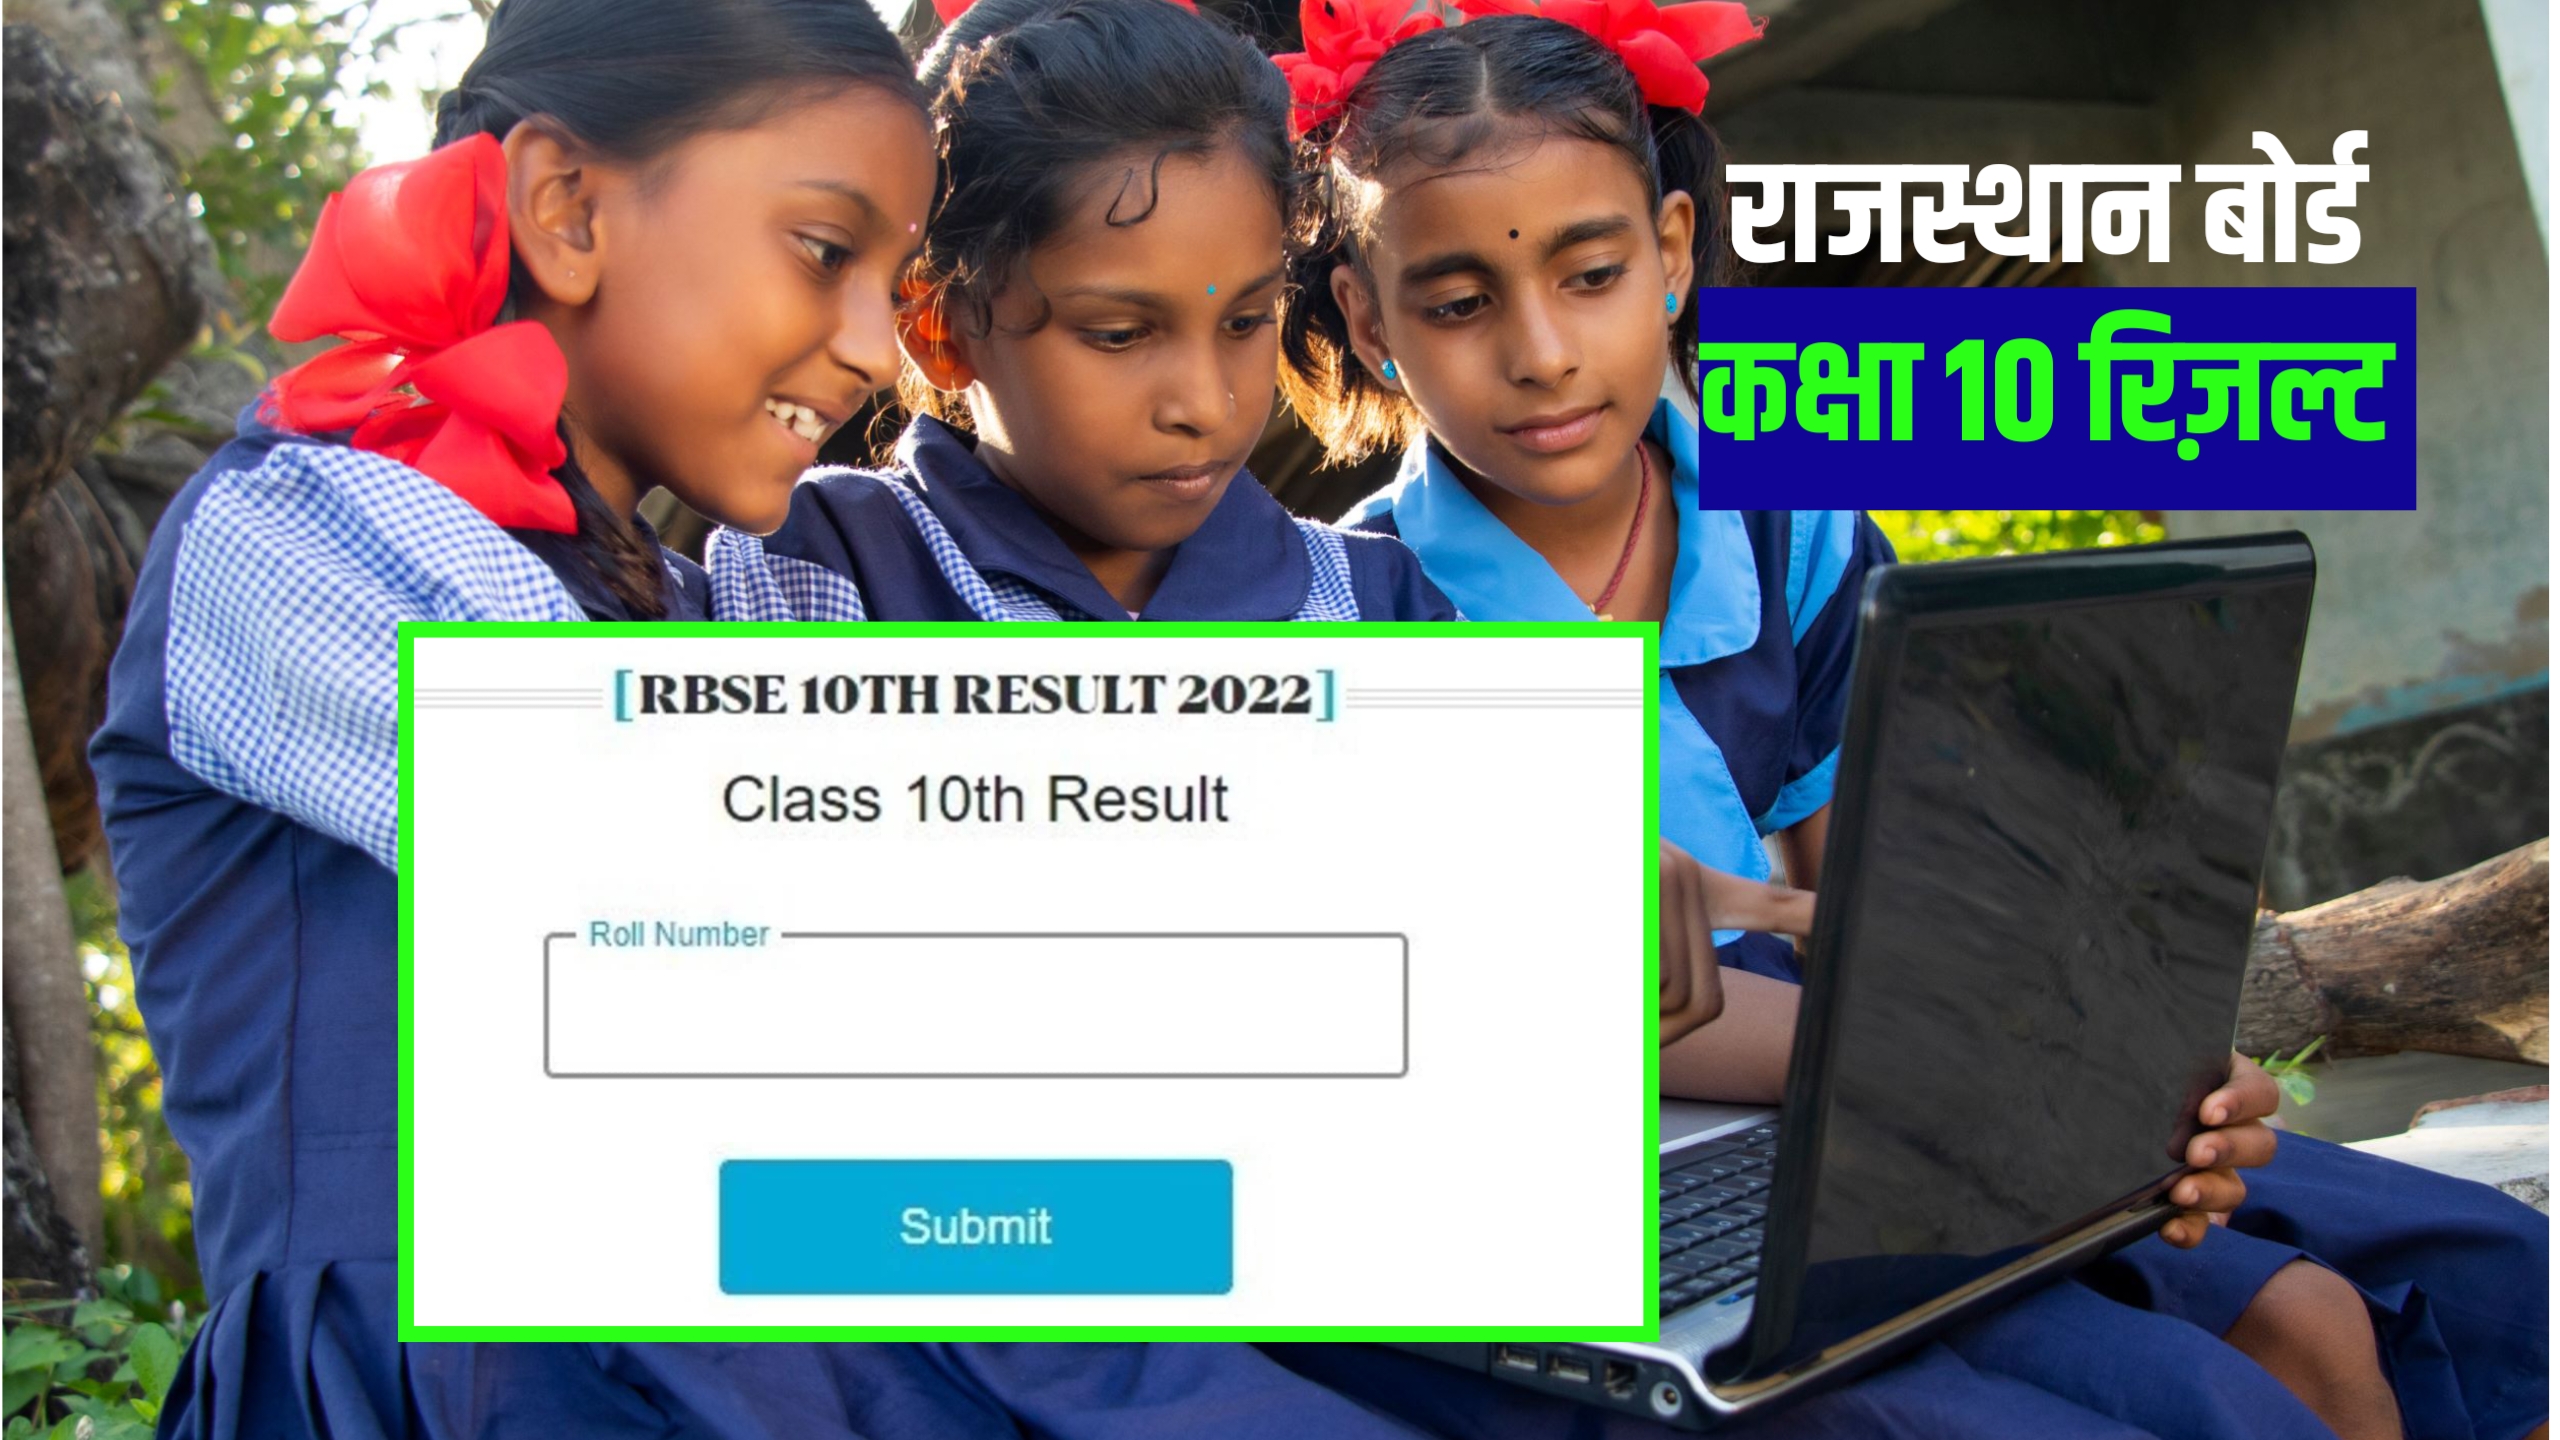 Rbse class 10th result